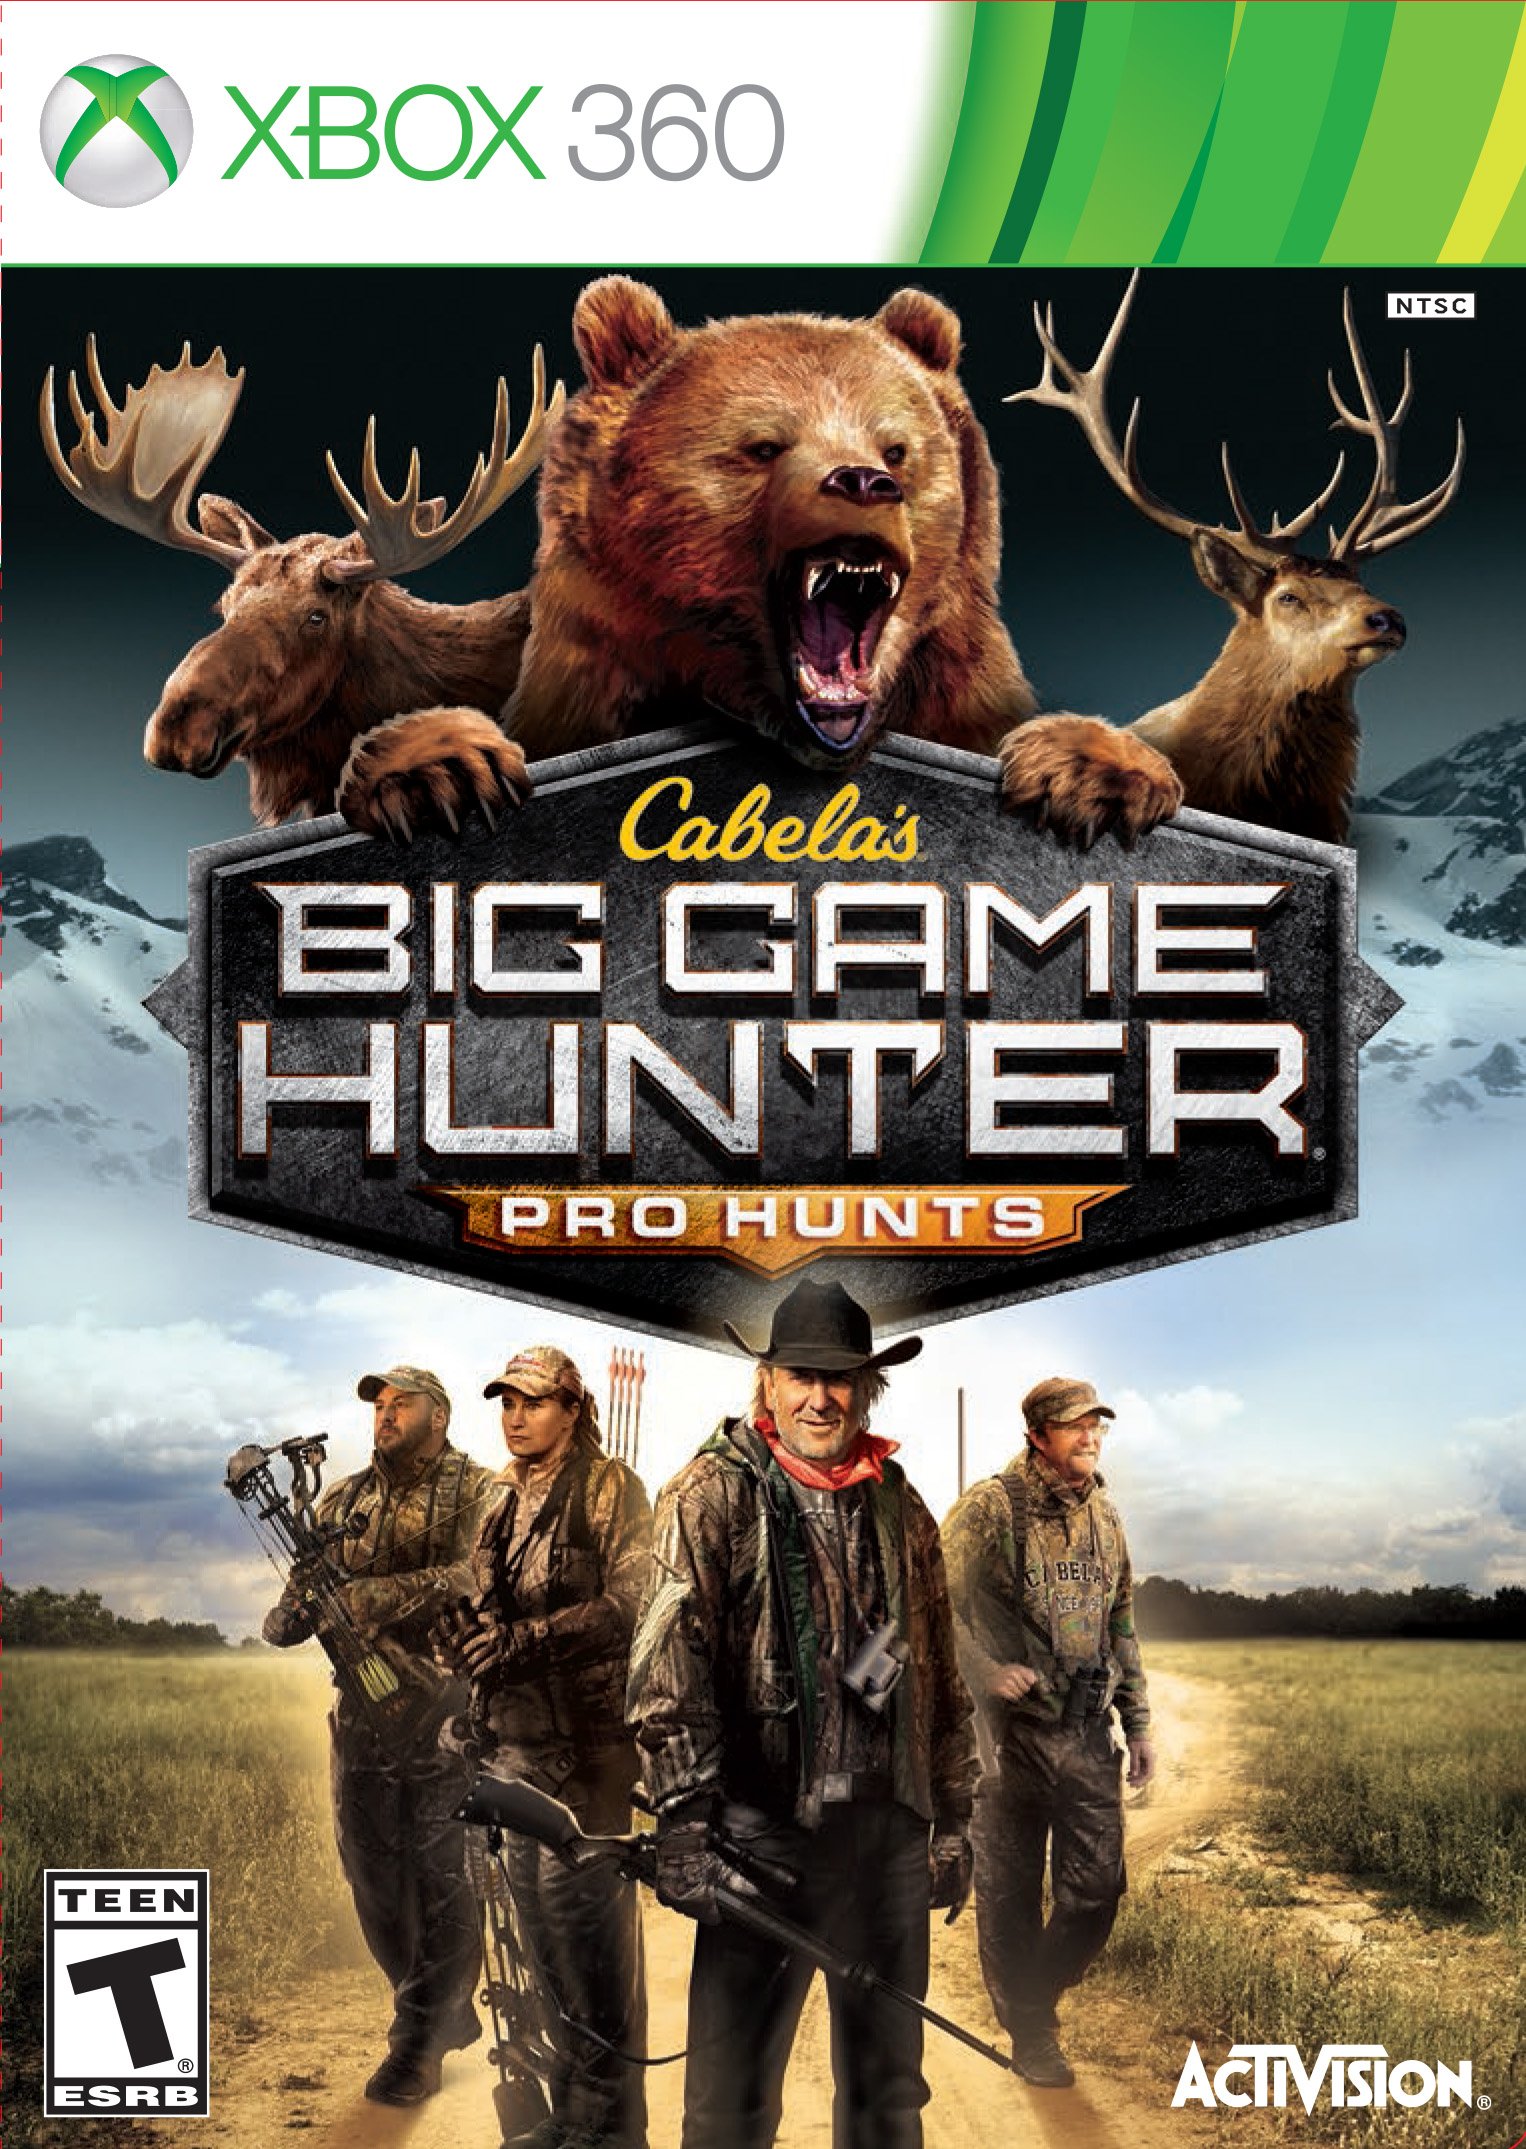 cabelas big game hunter pro hunts xbox 360 release date march 25 2014